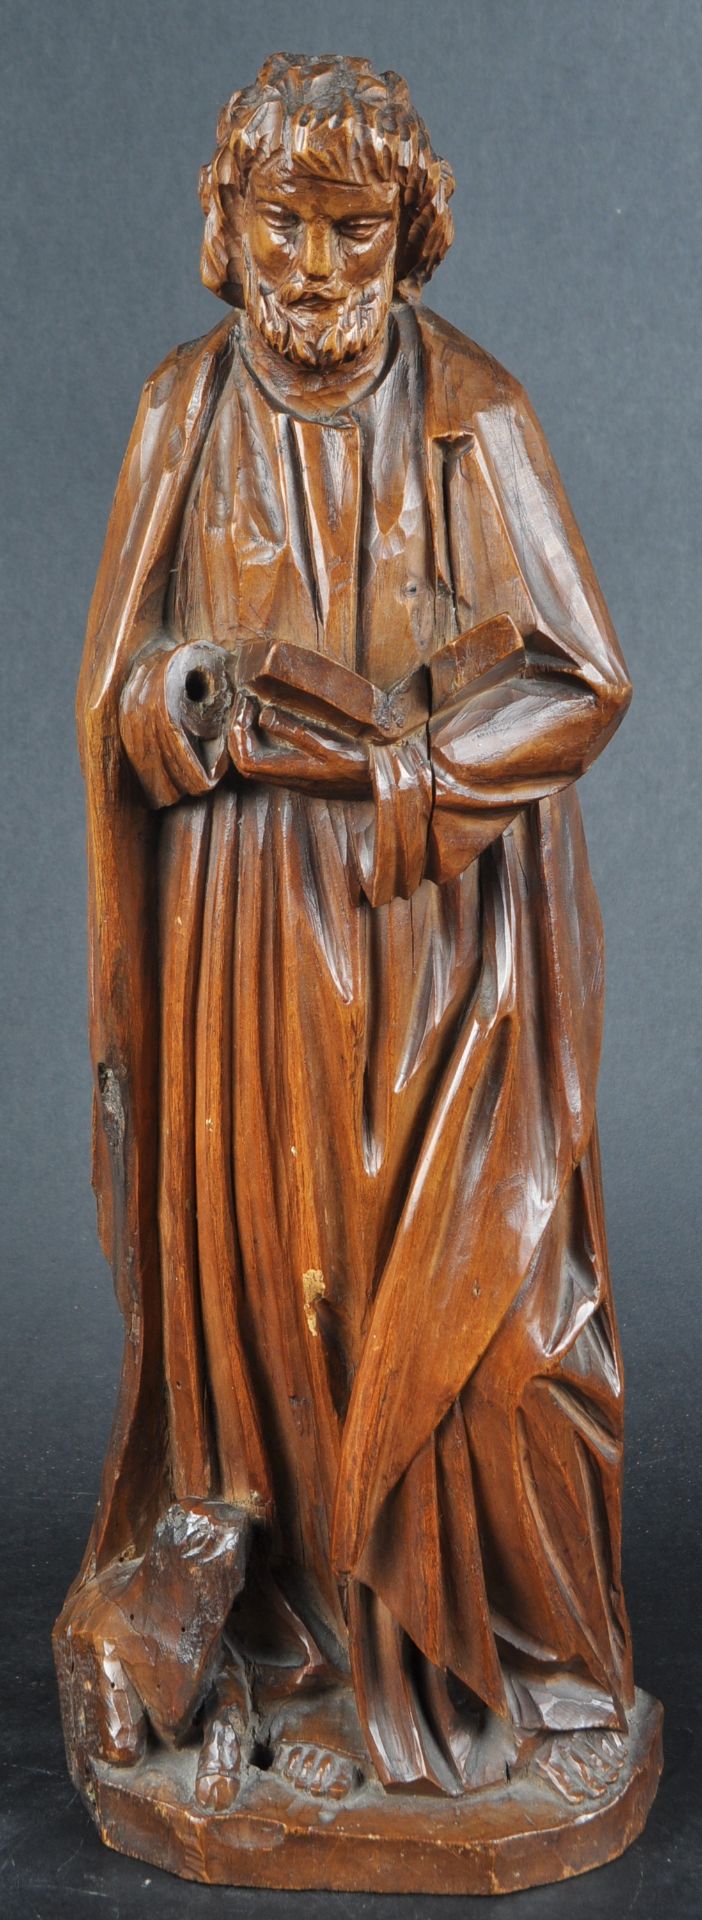 20TH CENTURY CARVED WOOD FIGURE OF A RELIGIOUS FIGURE